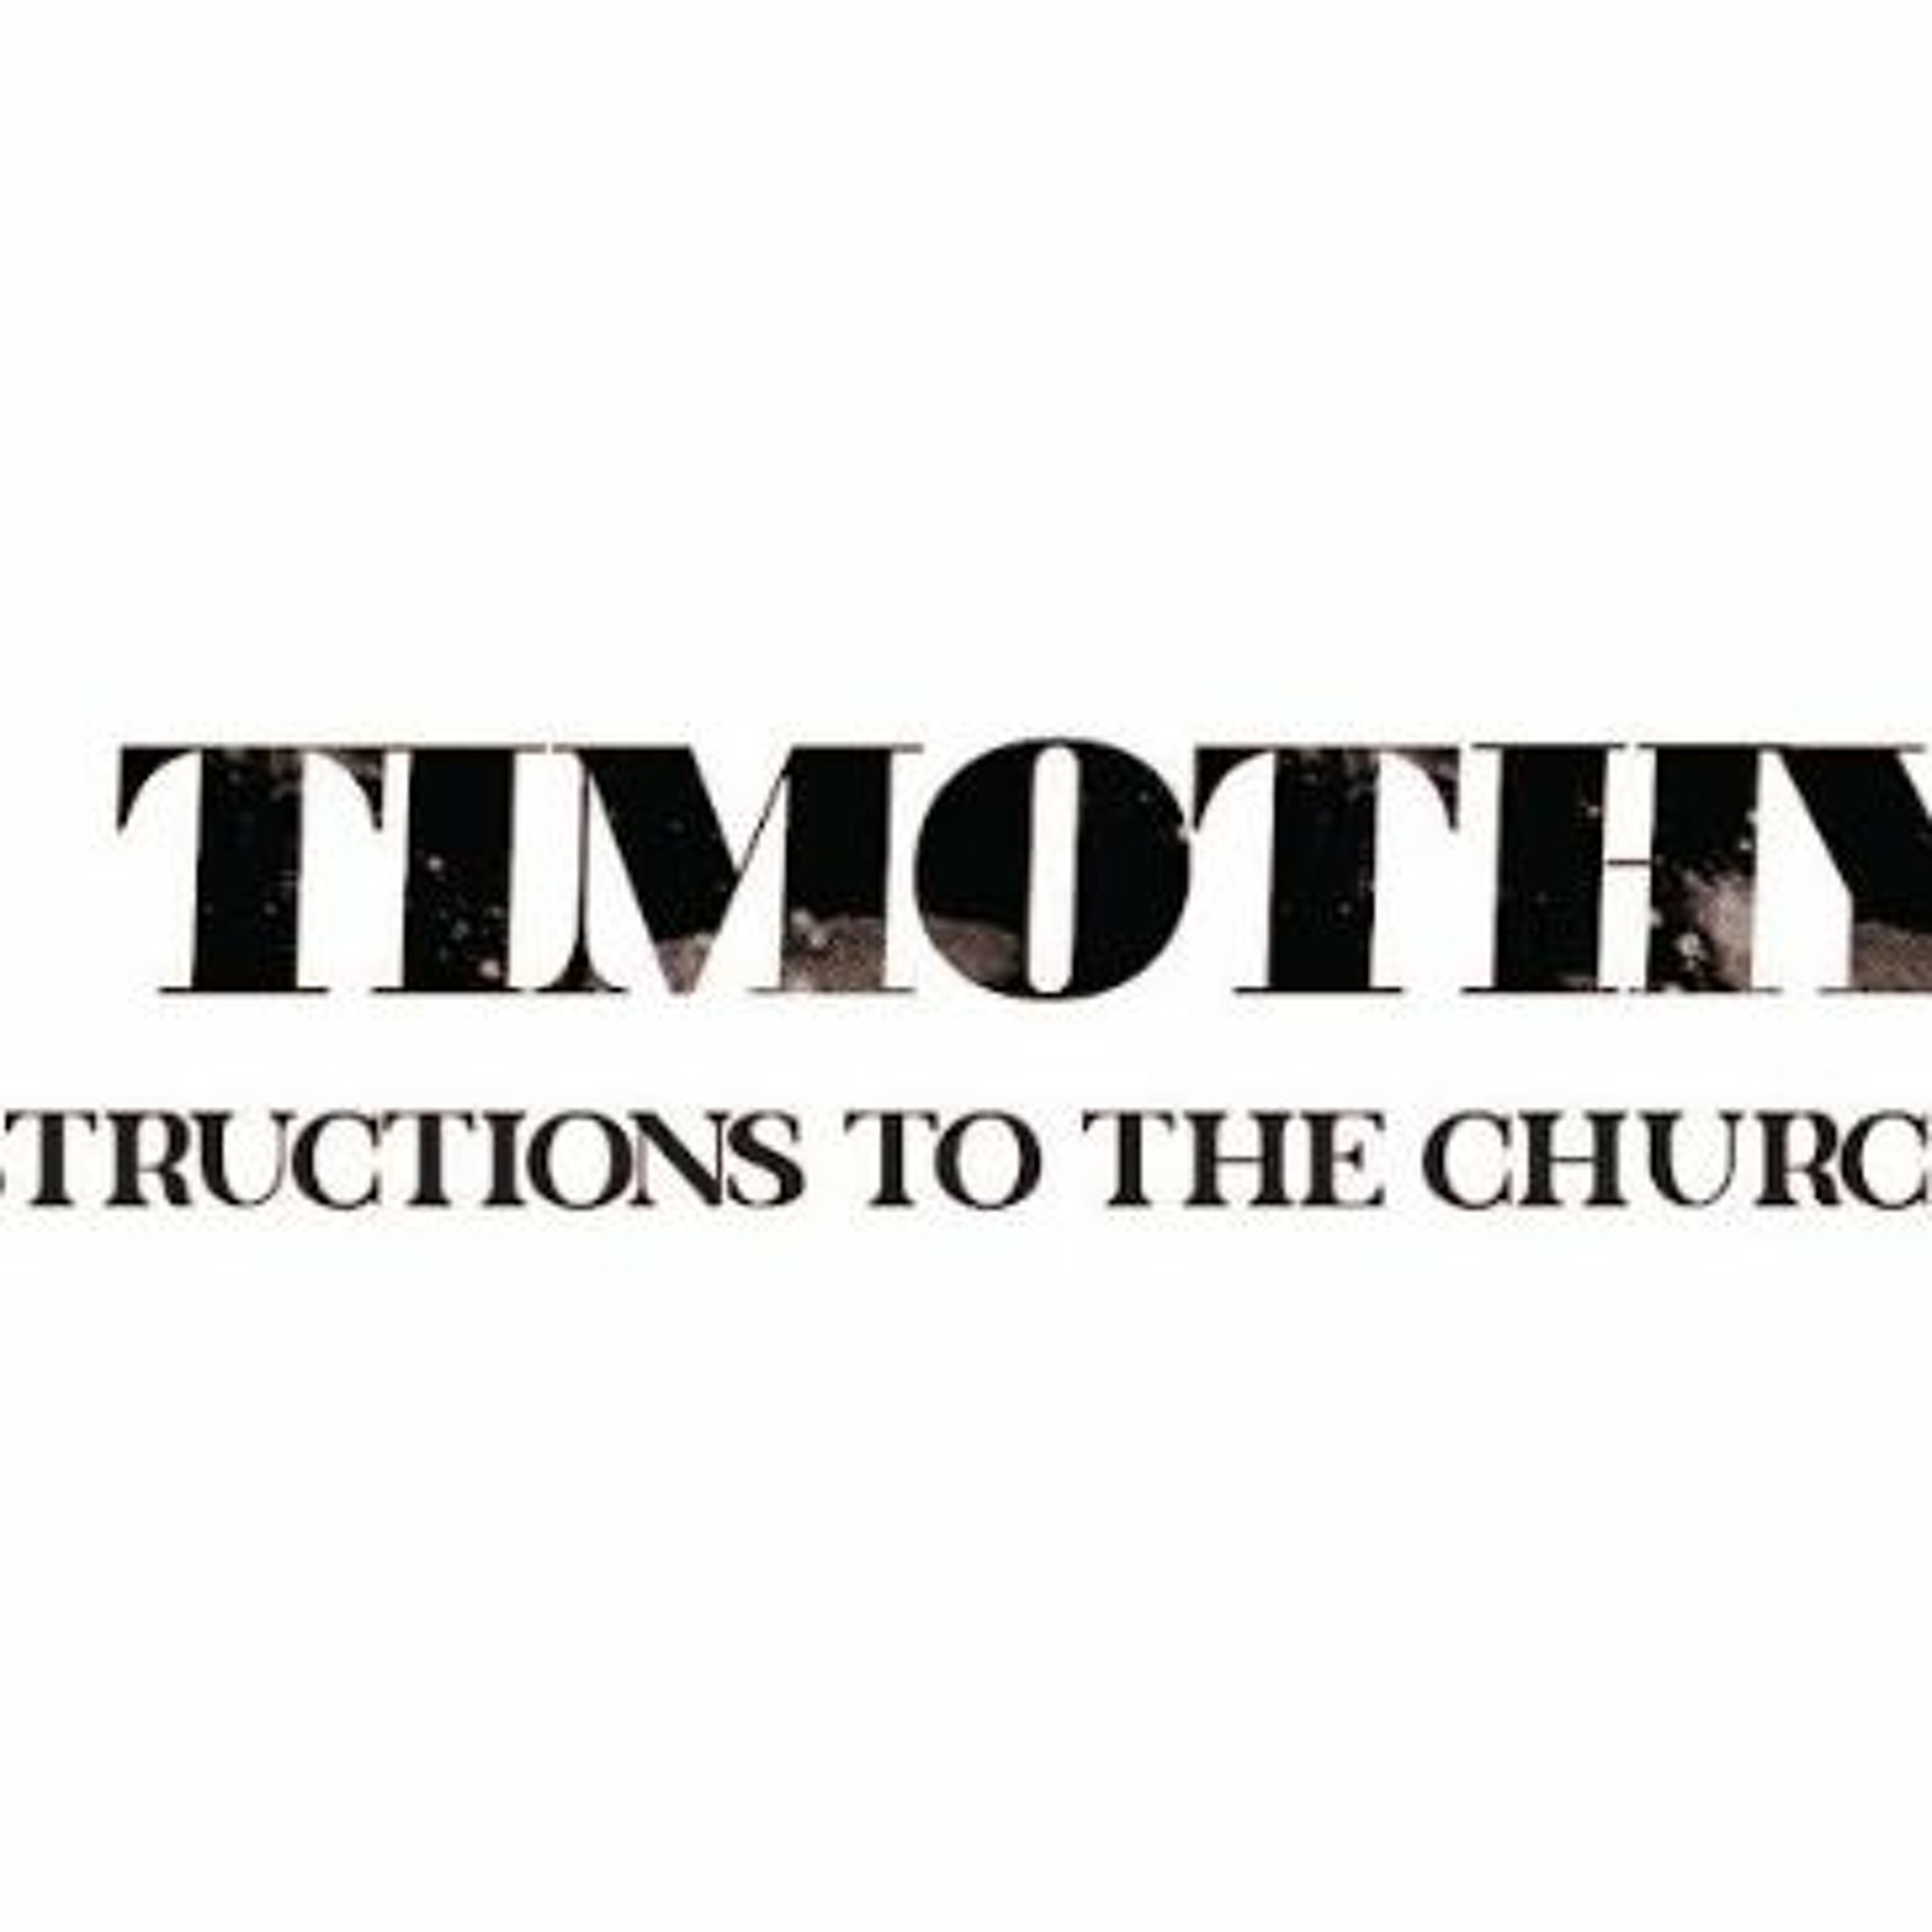 Pray… A lot: 1 Timothy-Instructions for the Church (6)- August 21, 2022